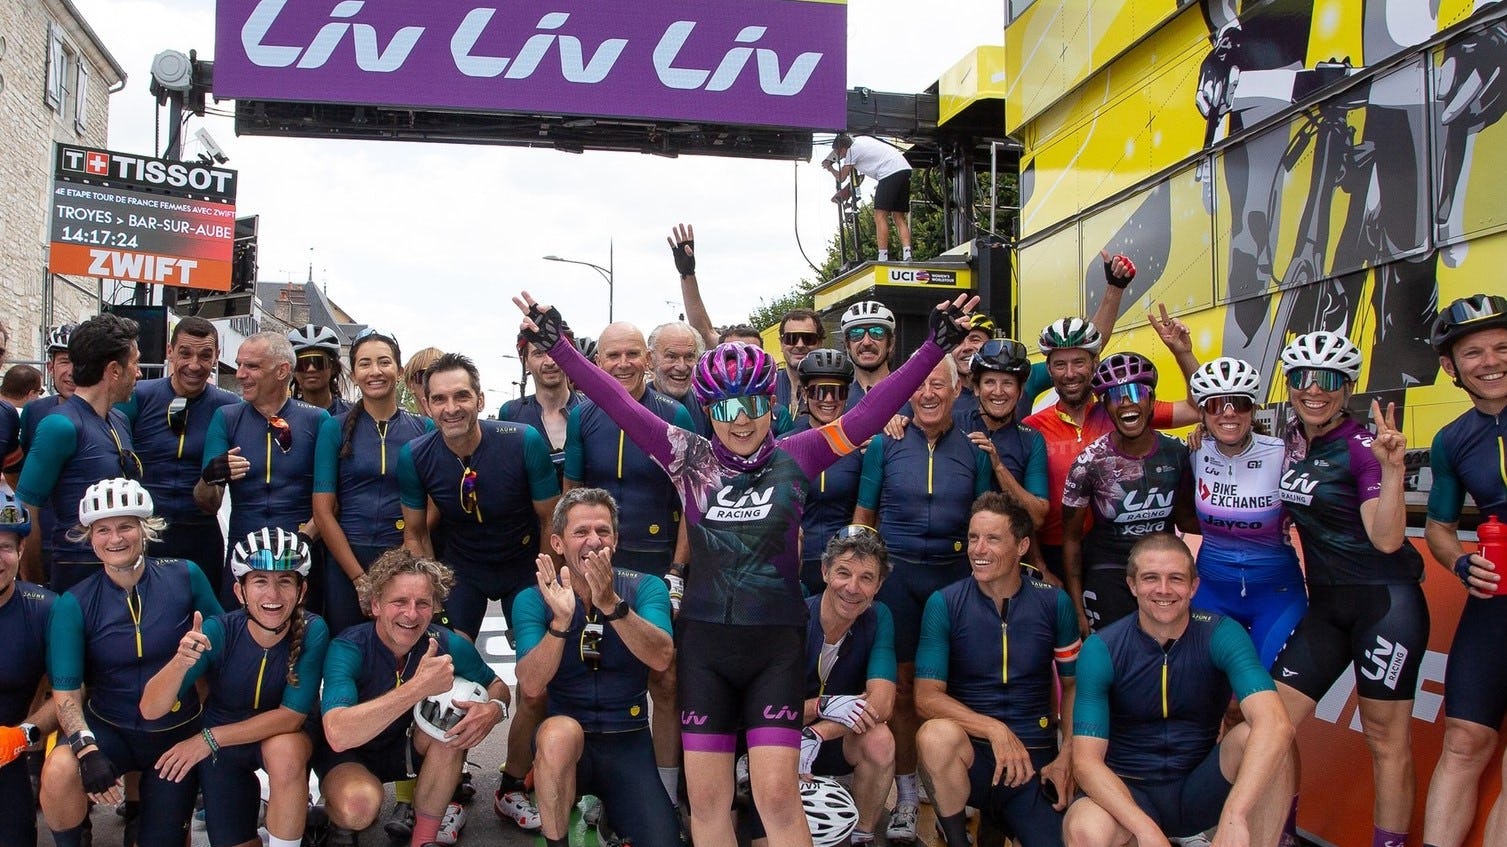 Liv founder and Giant Group Chairperson Bonnie Tu joined the tour version of the Le Tour de France Femmes. “It was really important to show my commitment to women’s cycling,” said Tu. – Photo Giant